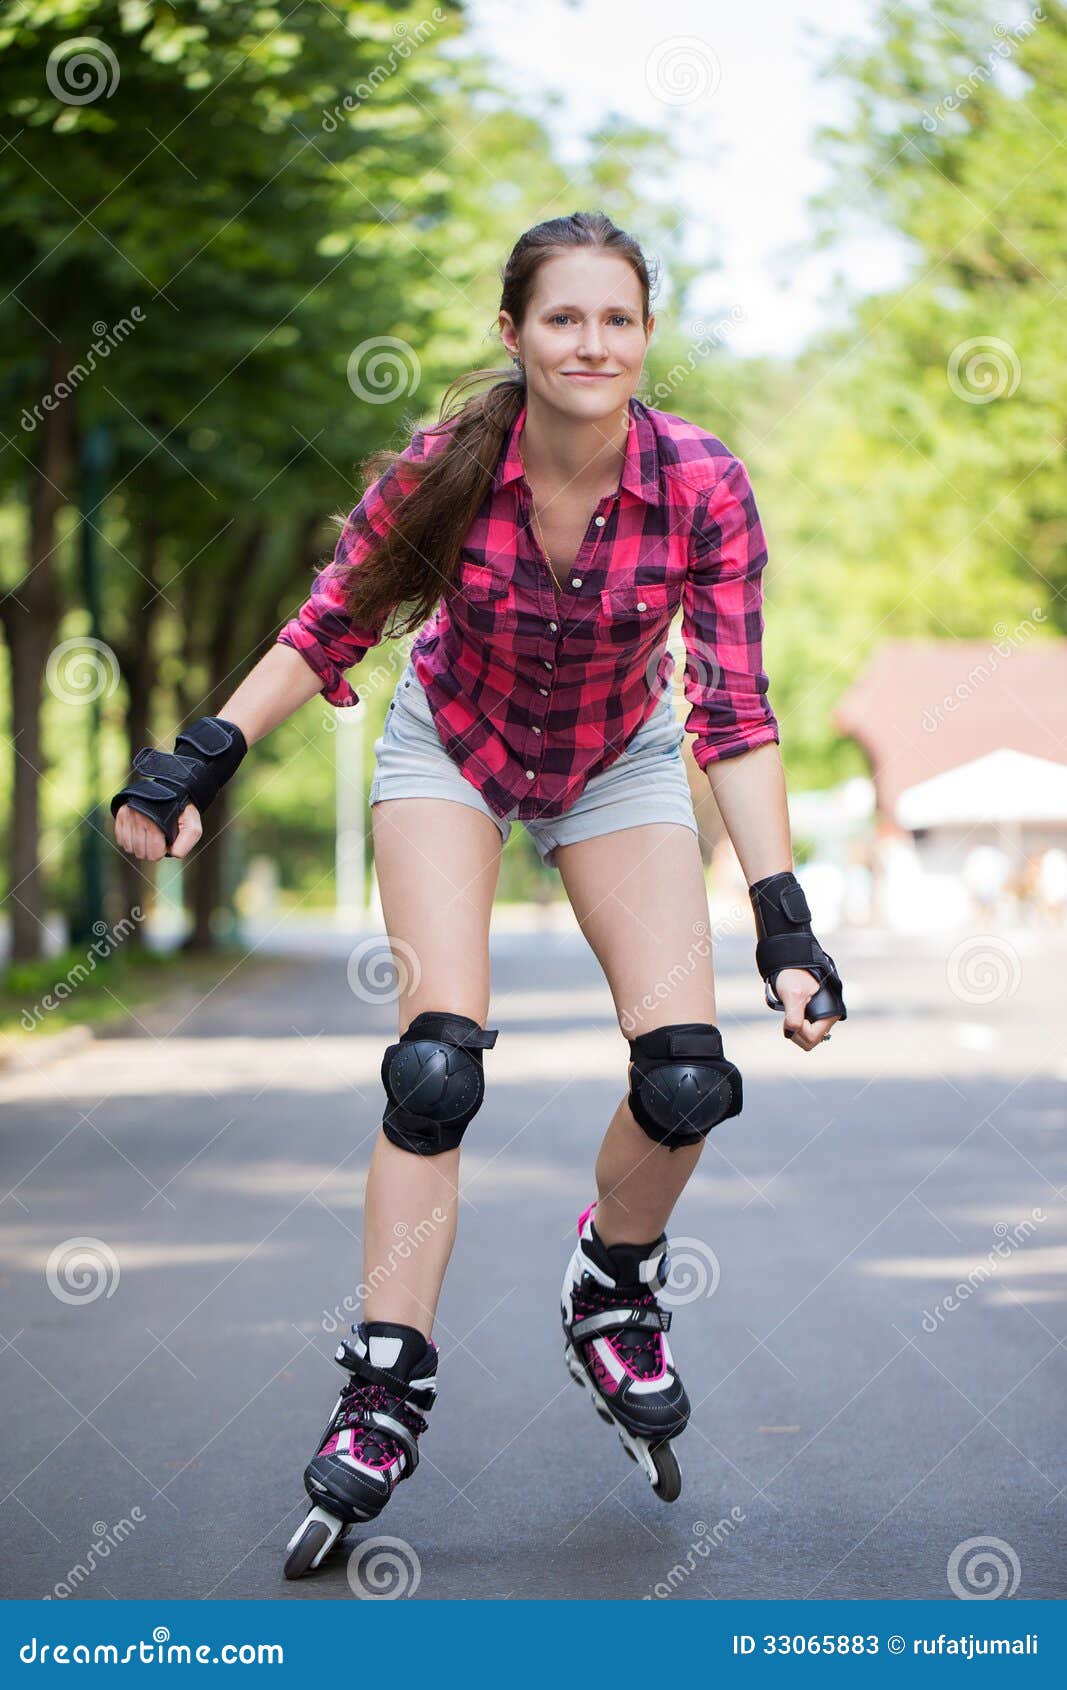 Girl Riding Rollerblades Stock Image Image Of Activity 33065883